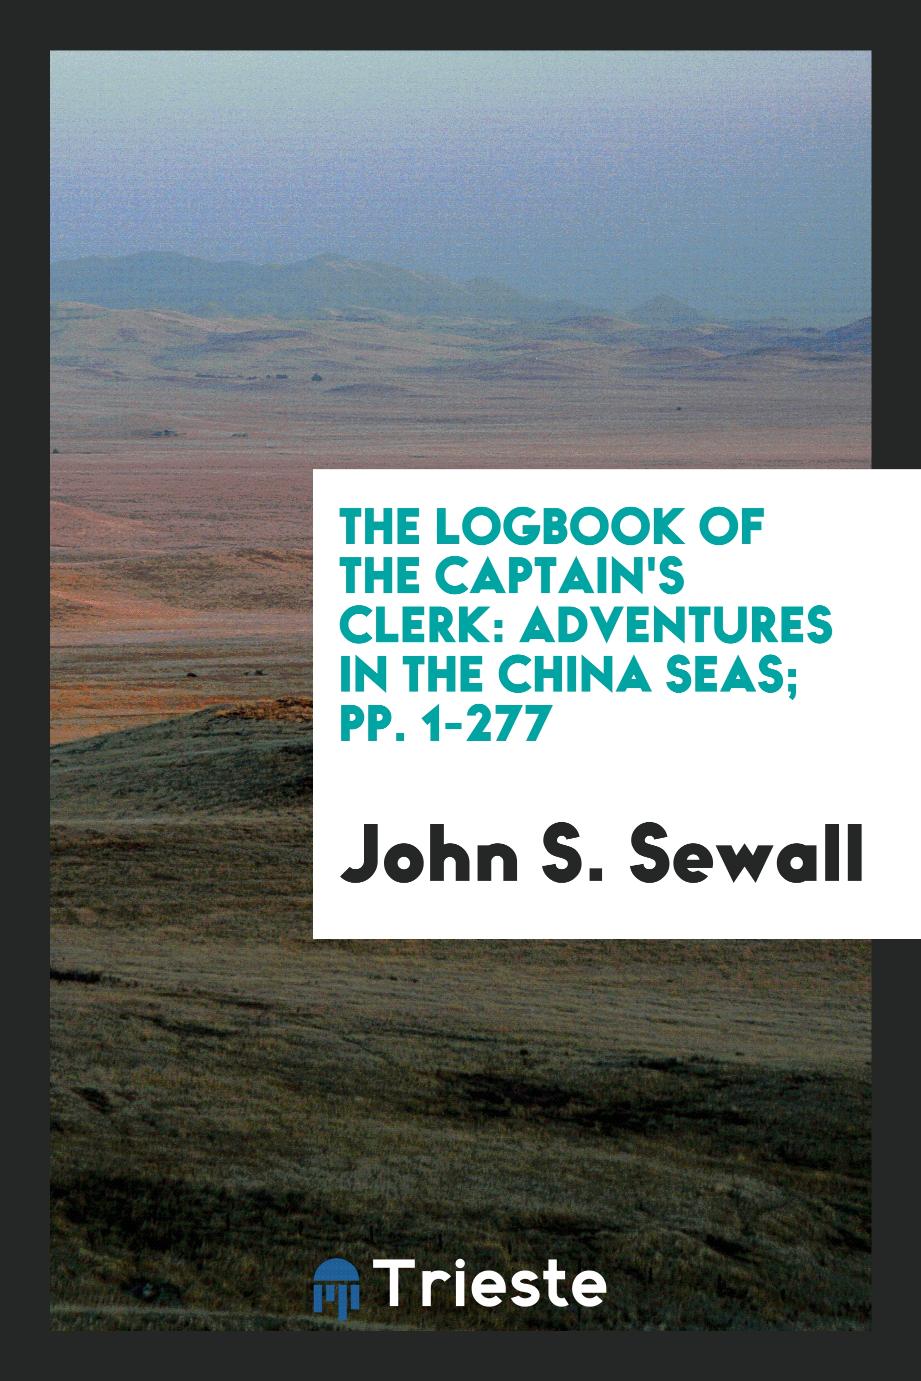 The Logbook of the Captain's Clerk: Adventures in the China Seas; pp. 1-277